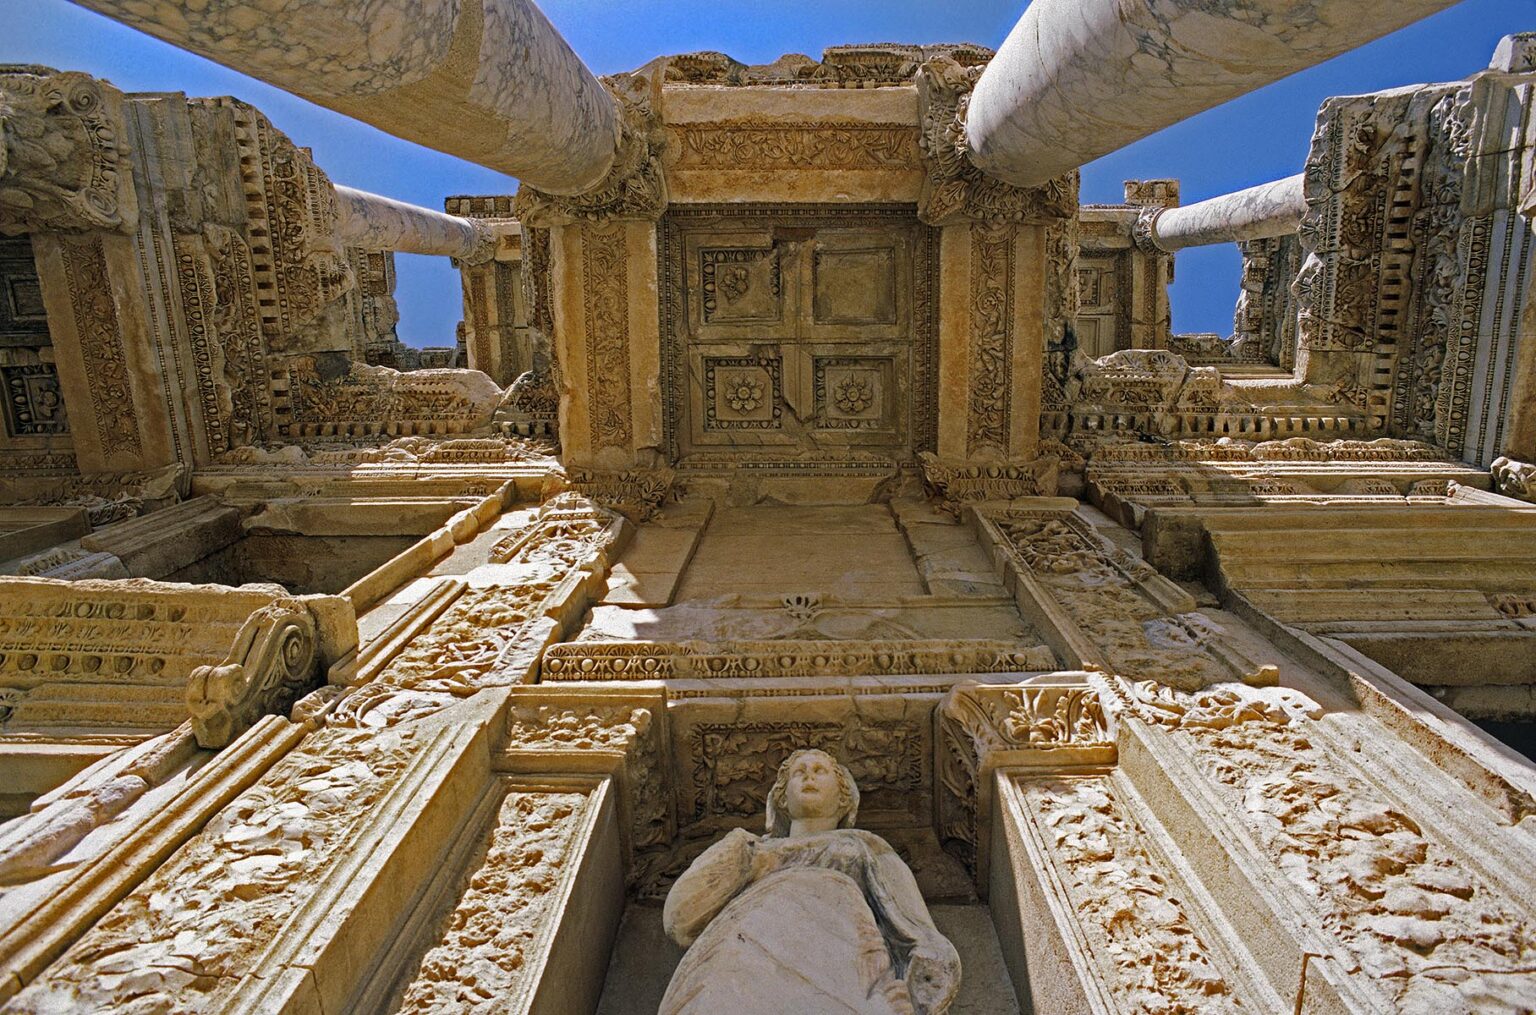 Dramatic upward angle of the Library of Celsus at EHESUS (One of the world's largest Greek/Roman archeological sights) - Turkey